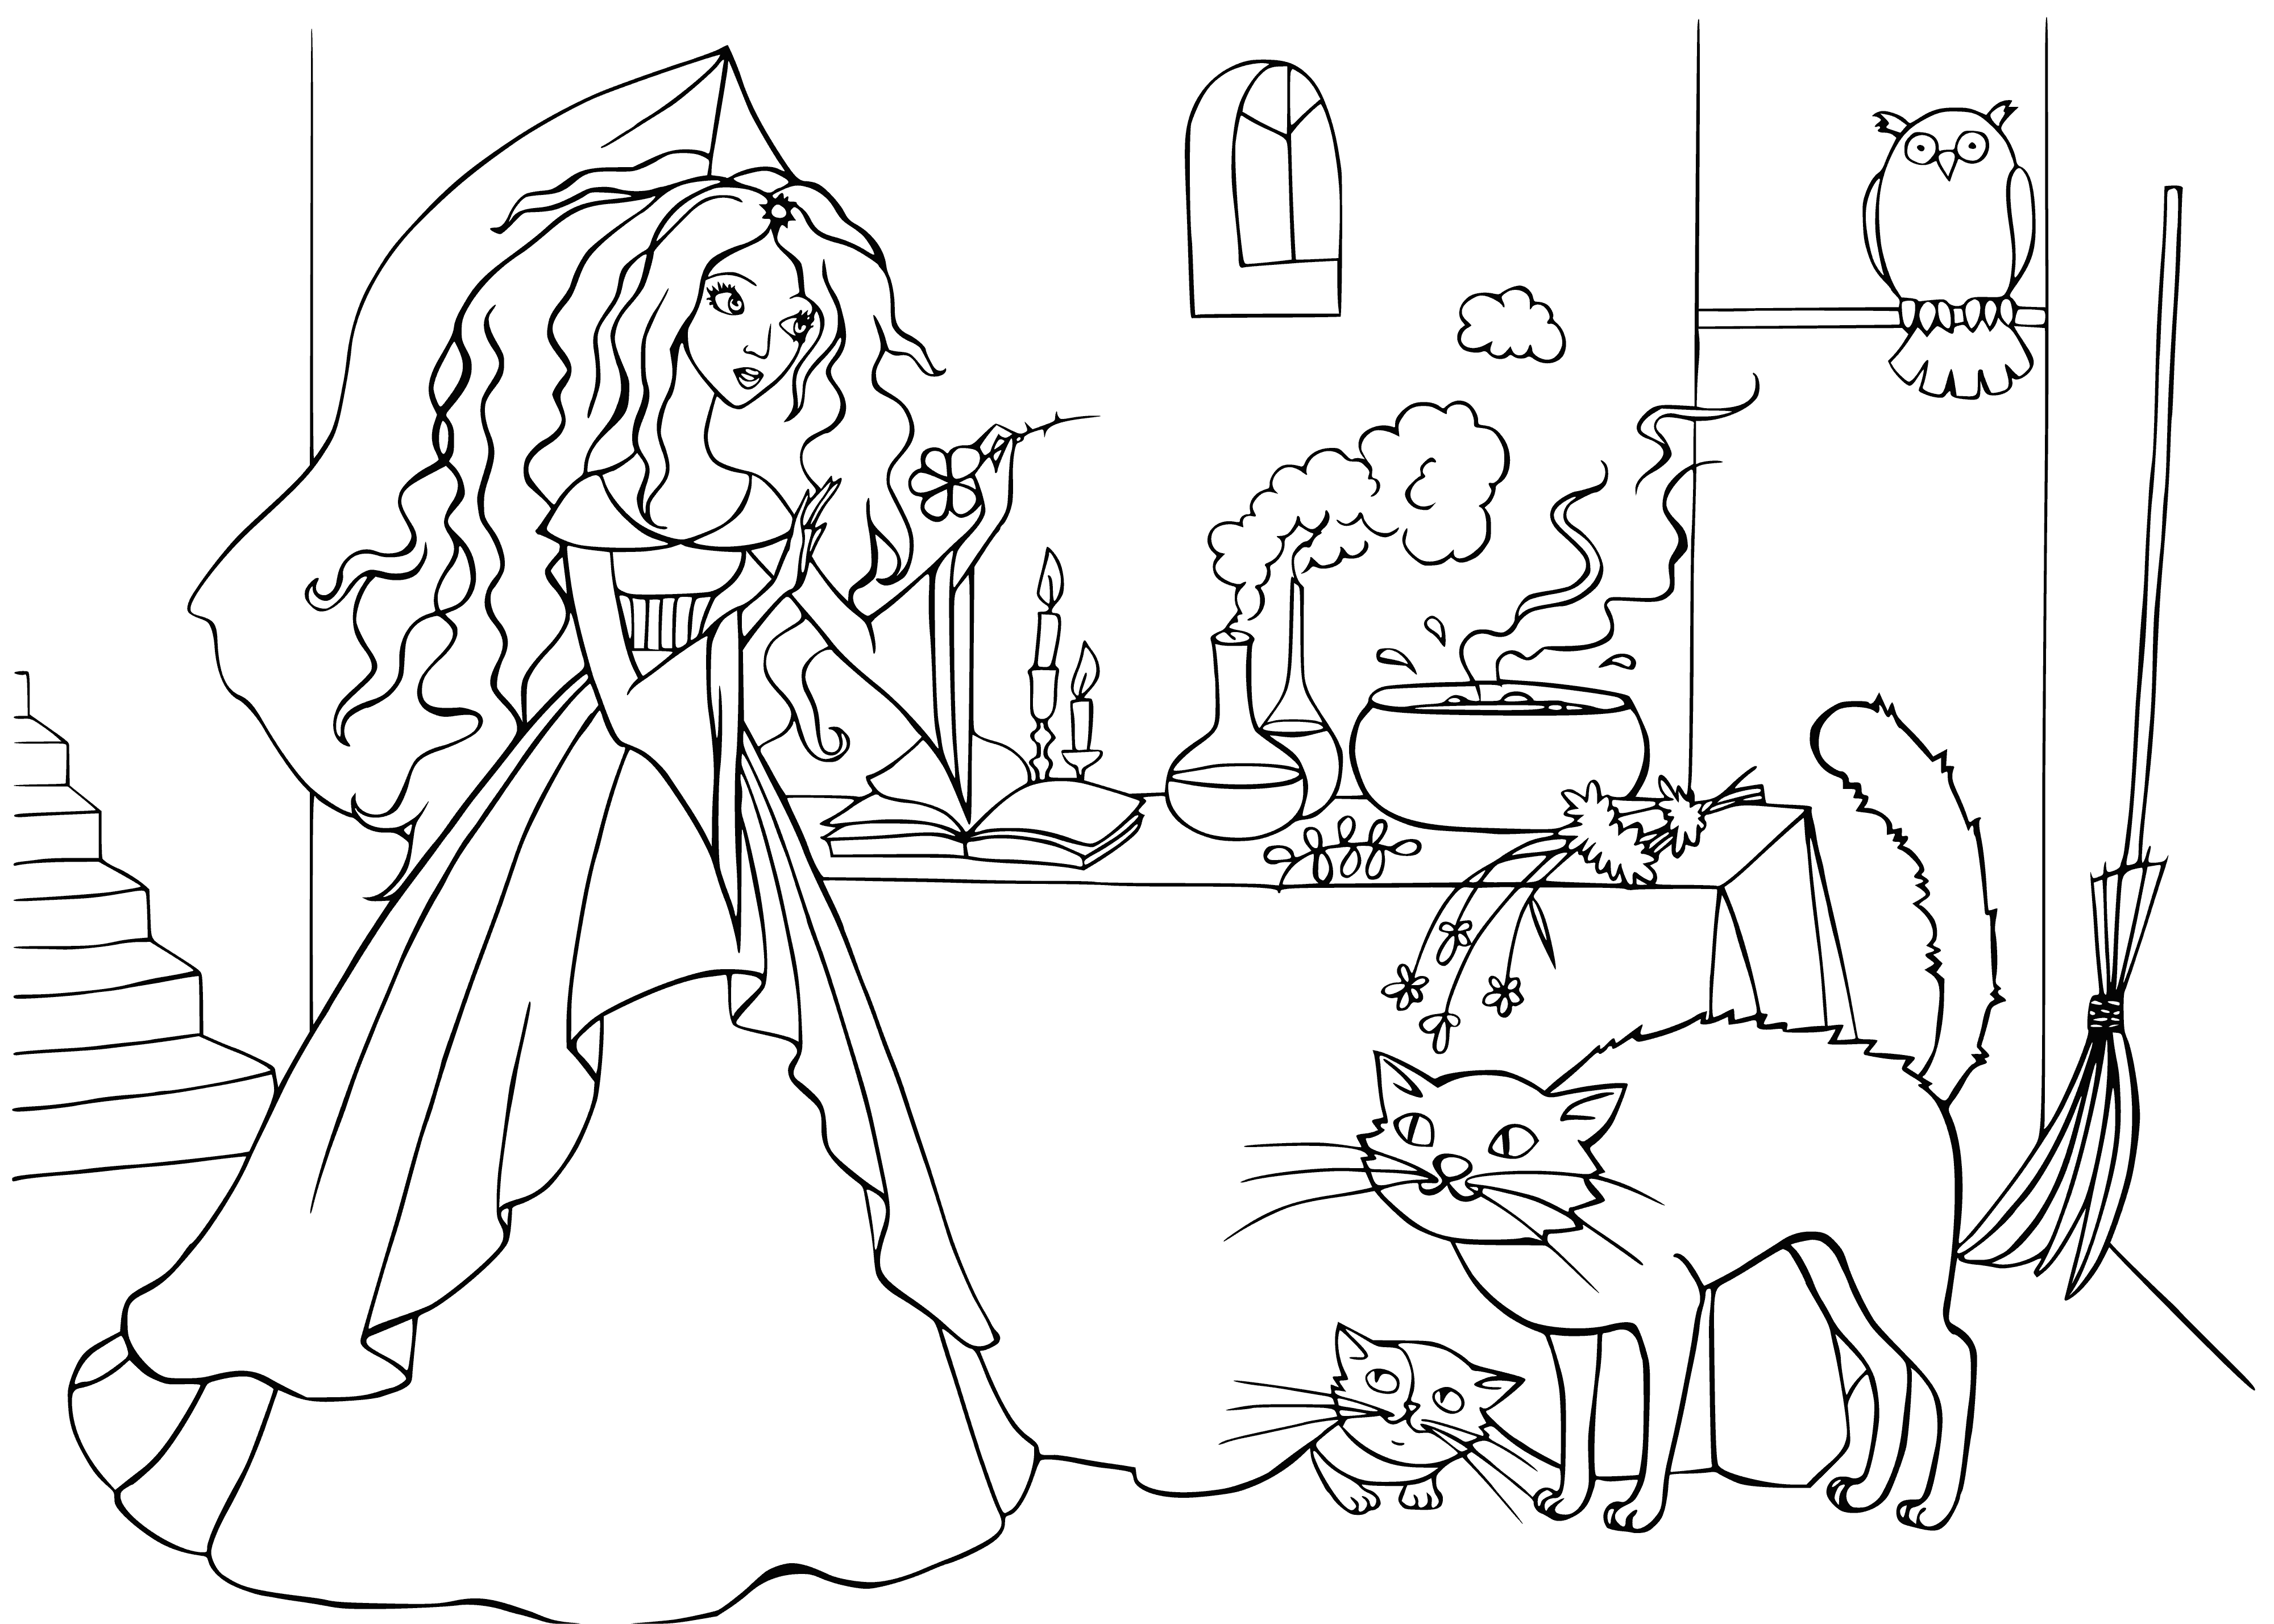 coloring page: In the Fairy kingdom of Witchcraft, there's an abundance of nature & magic with tall trees, a white marble Palace & statues surrounding a moat. Sparkles of magic fill the deep blue sky.